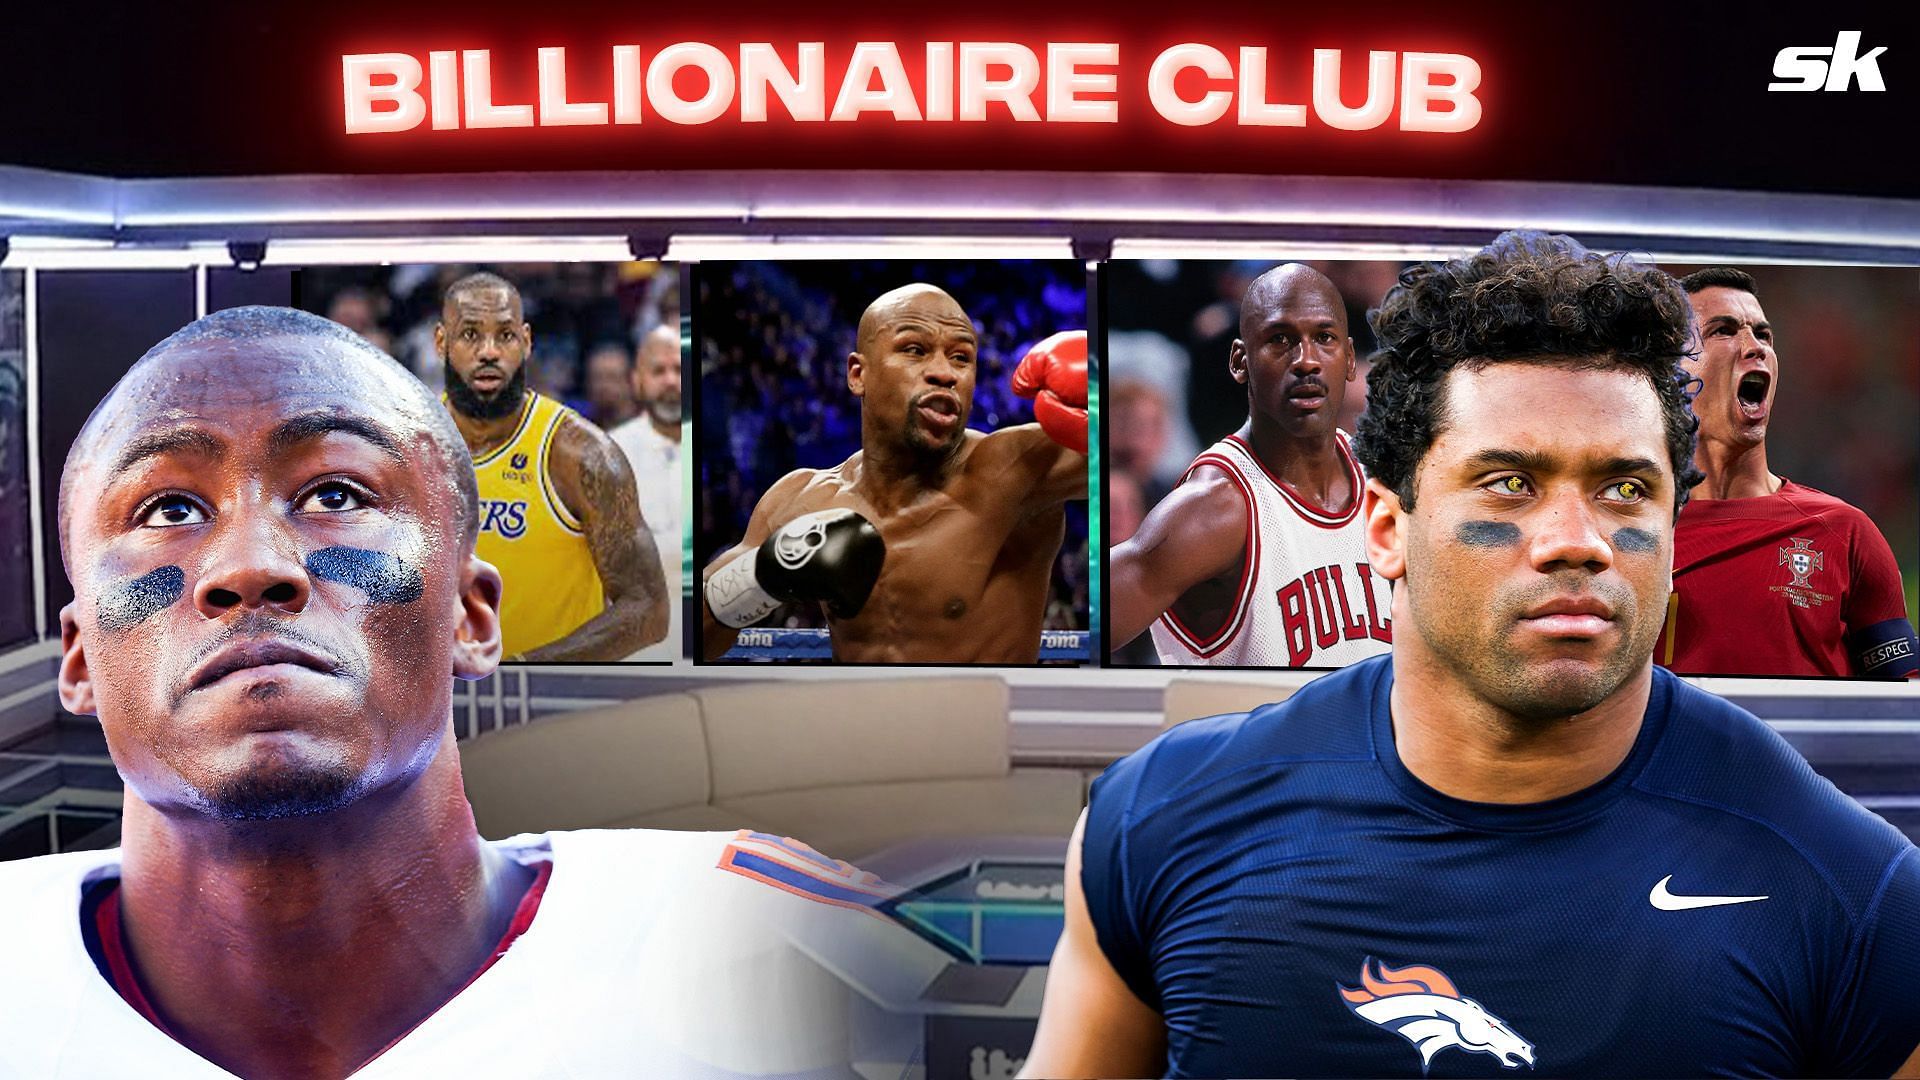 Brandon Marshall predicts that Russell Wilson will become a billionaire